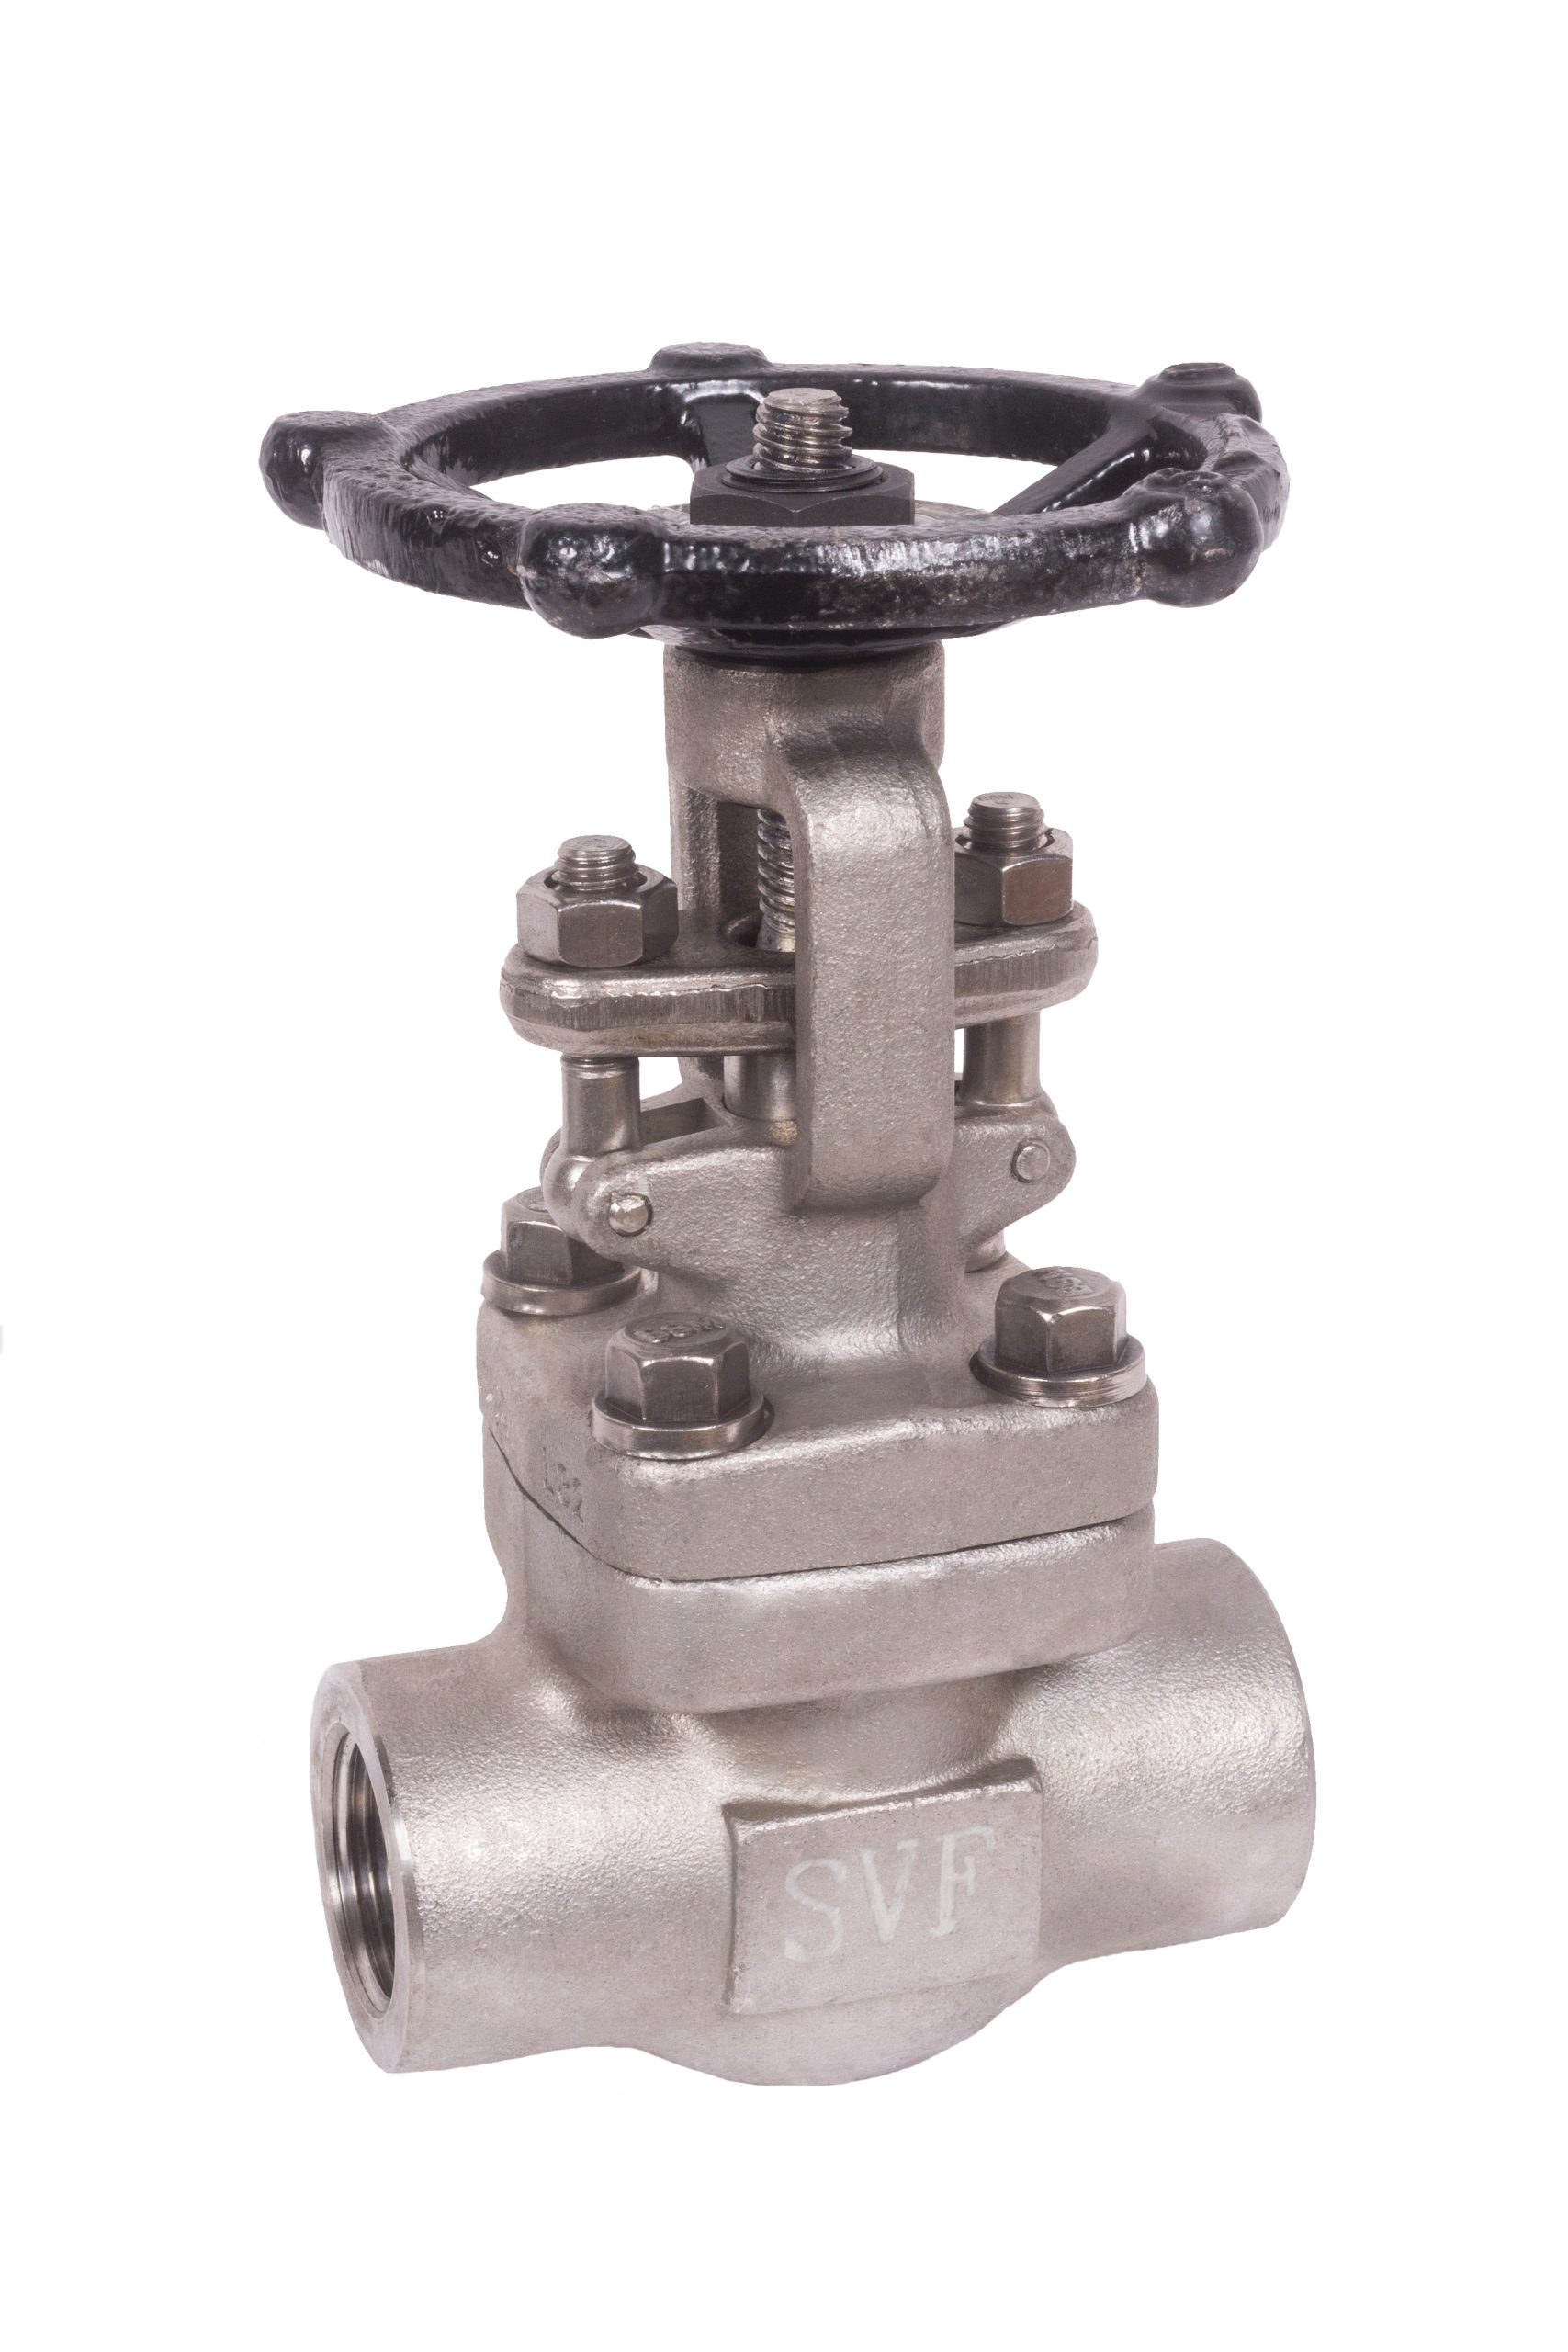 500FSSW Forged Stainless Steel Gate Valve - Socket Weld